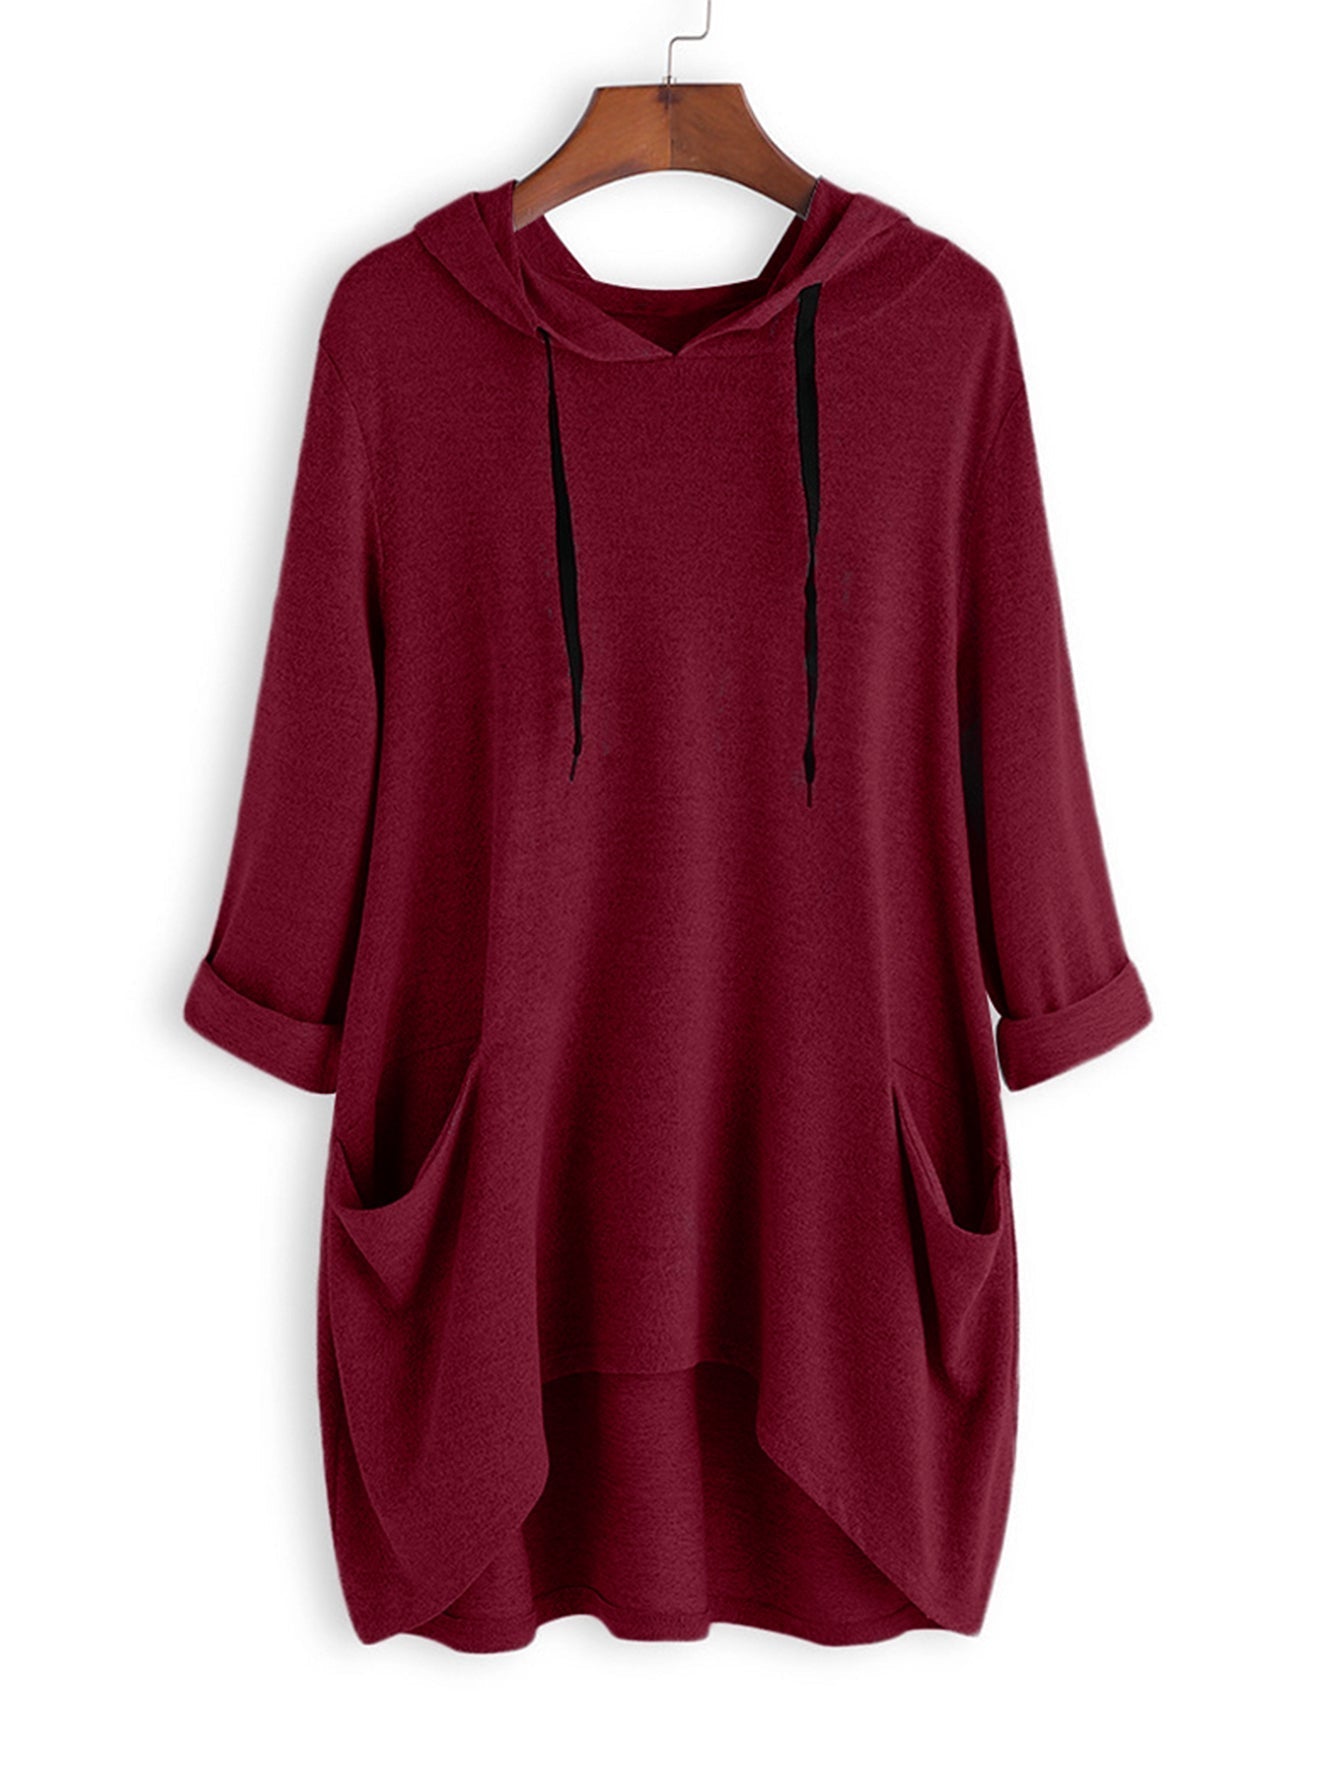 Three-quarter sleeve loose knit solid color Plus size casual coat hoodie Sai Feel